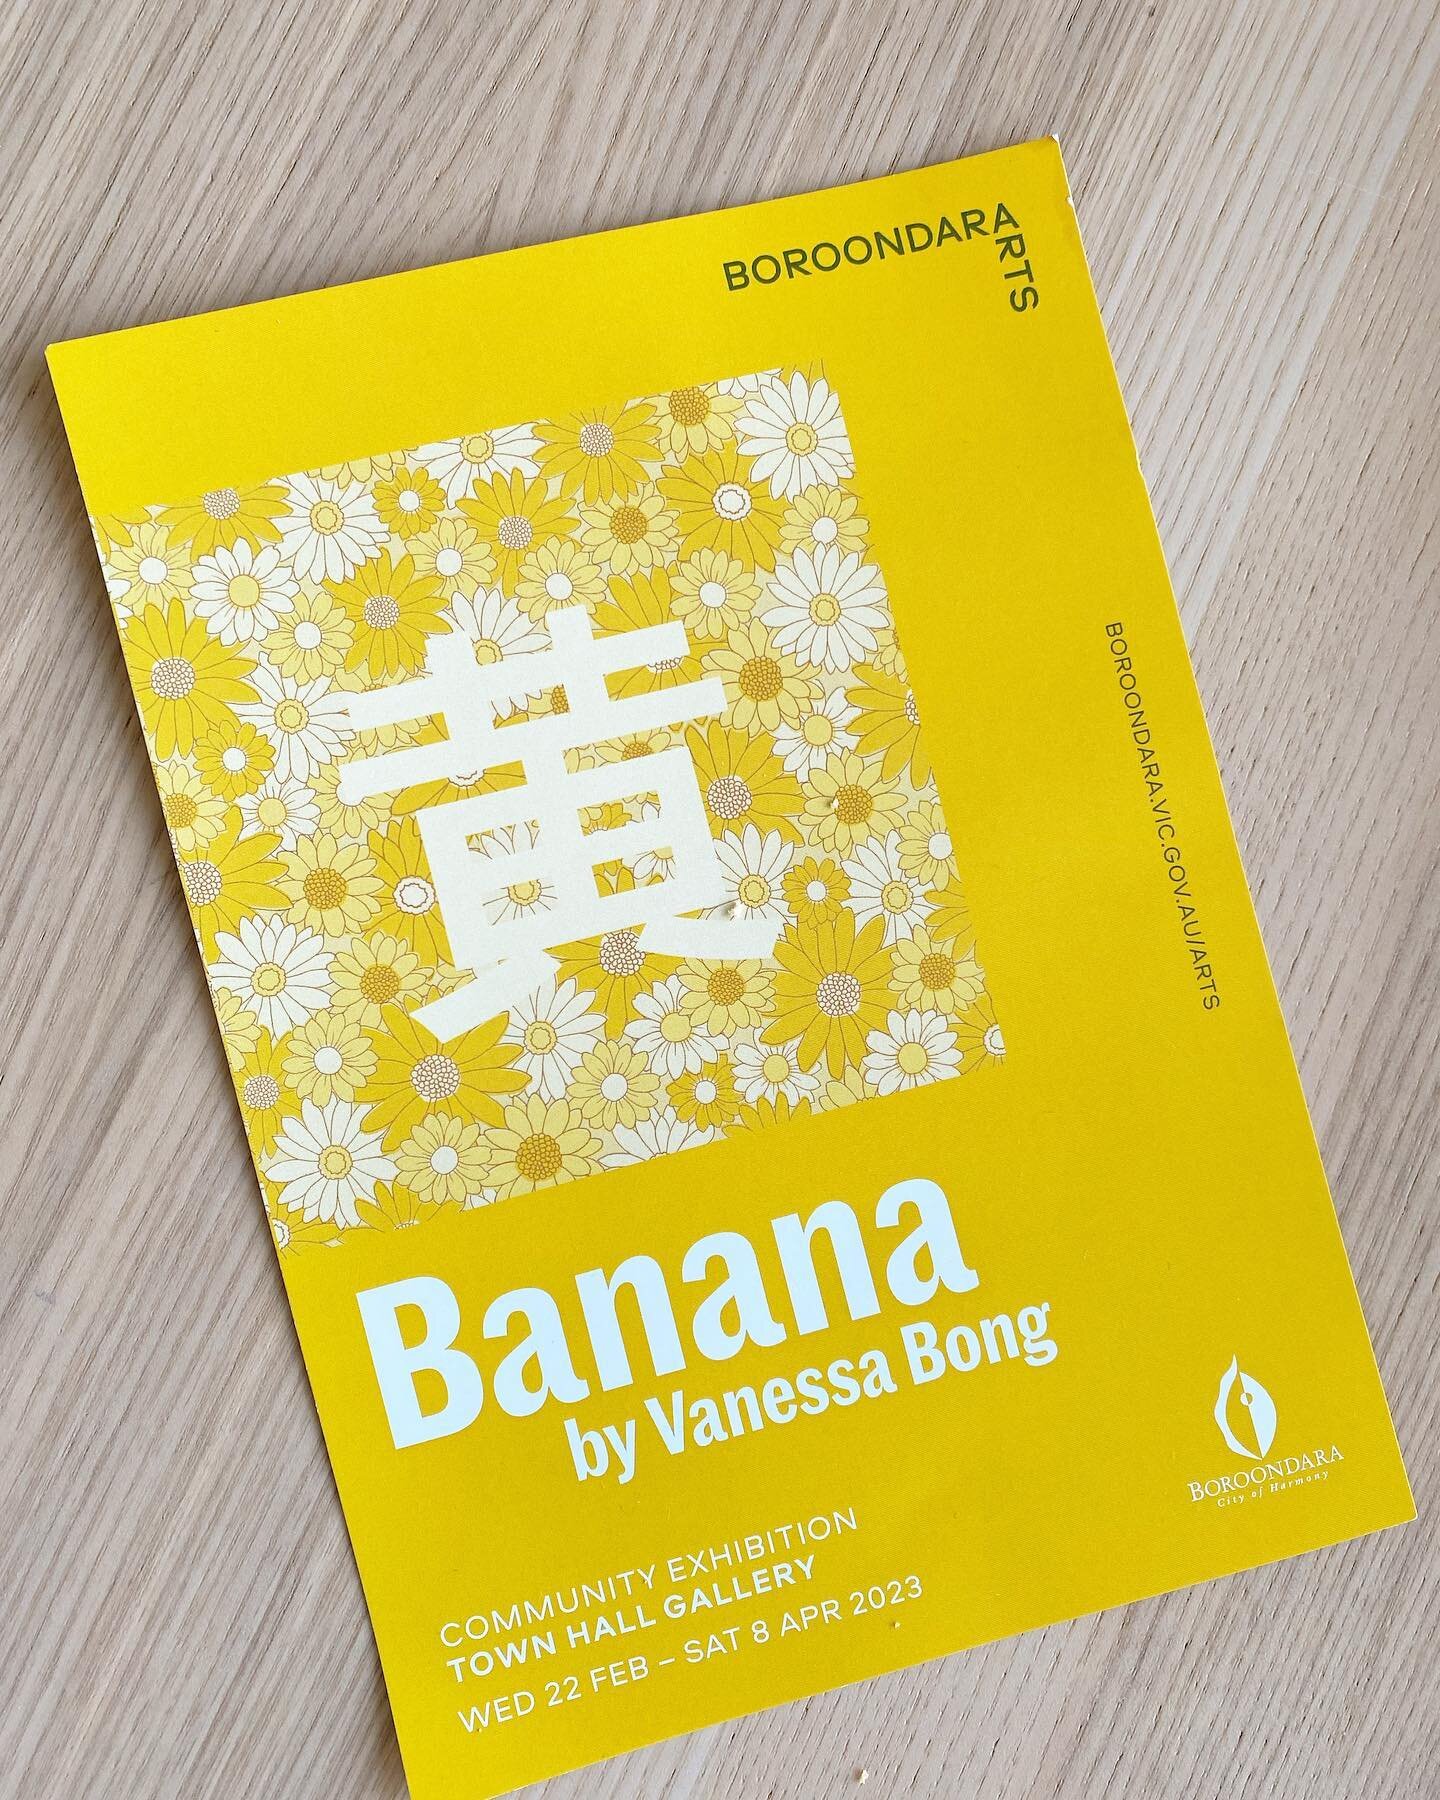 I&rsquo;m super excited to tell you guys about my exhibition that is running at @boroondara_arts ! It&rsquo;s called Banana and it&rsquo;s all about my experience as an Asian Australian. I hope that you can check it out! It&rsquo;s running until Apri